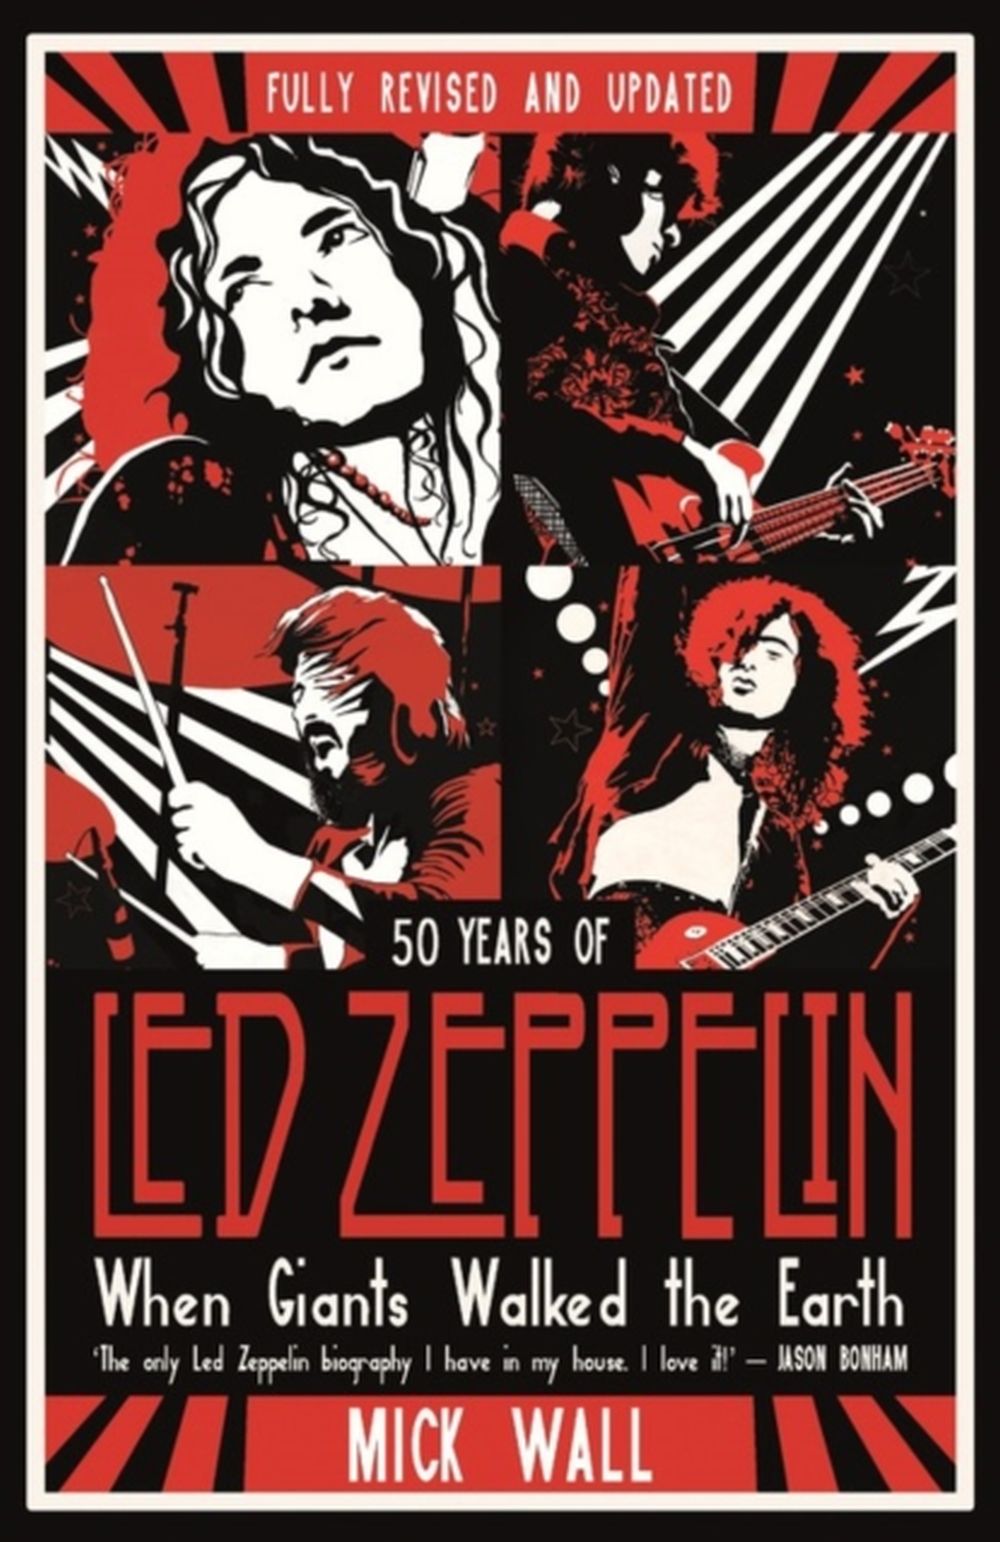 Led Zeppelin - Wall, Mick - When Giants Walked The Earth: 50 Years Of Led Zeppelin - Book - New